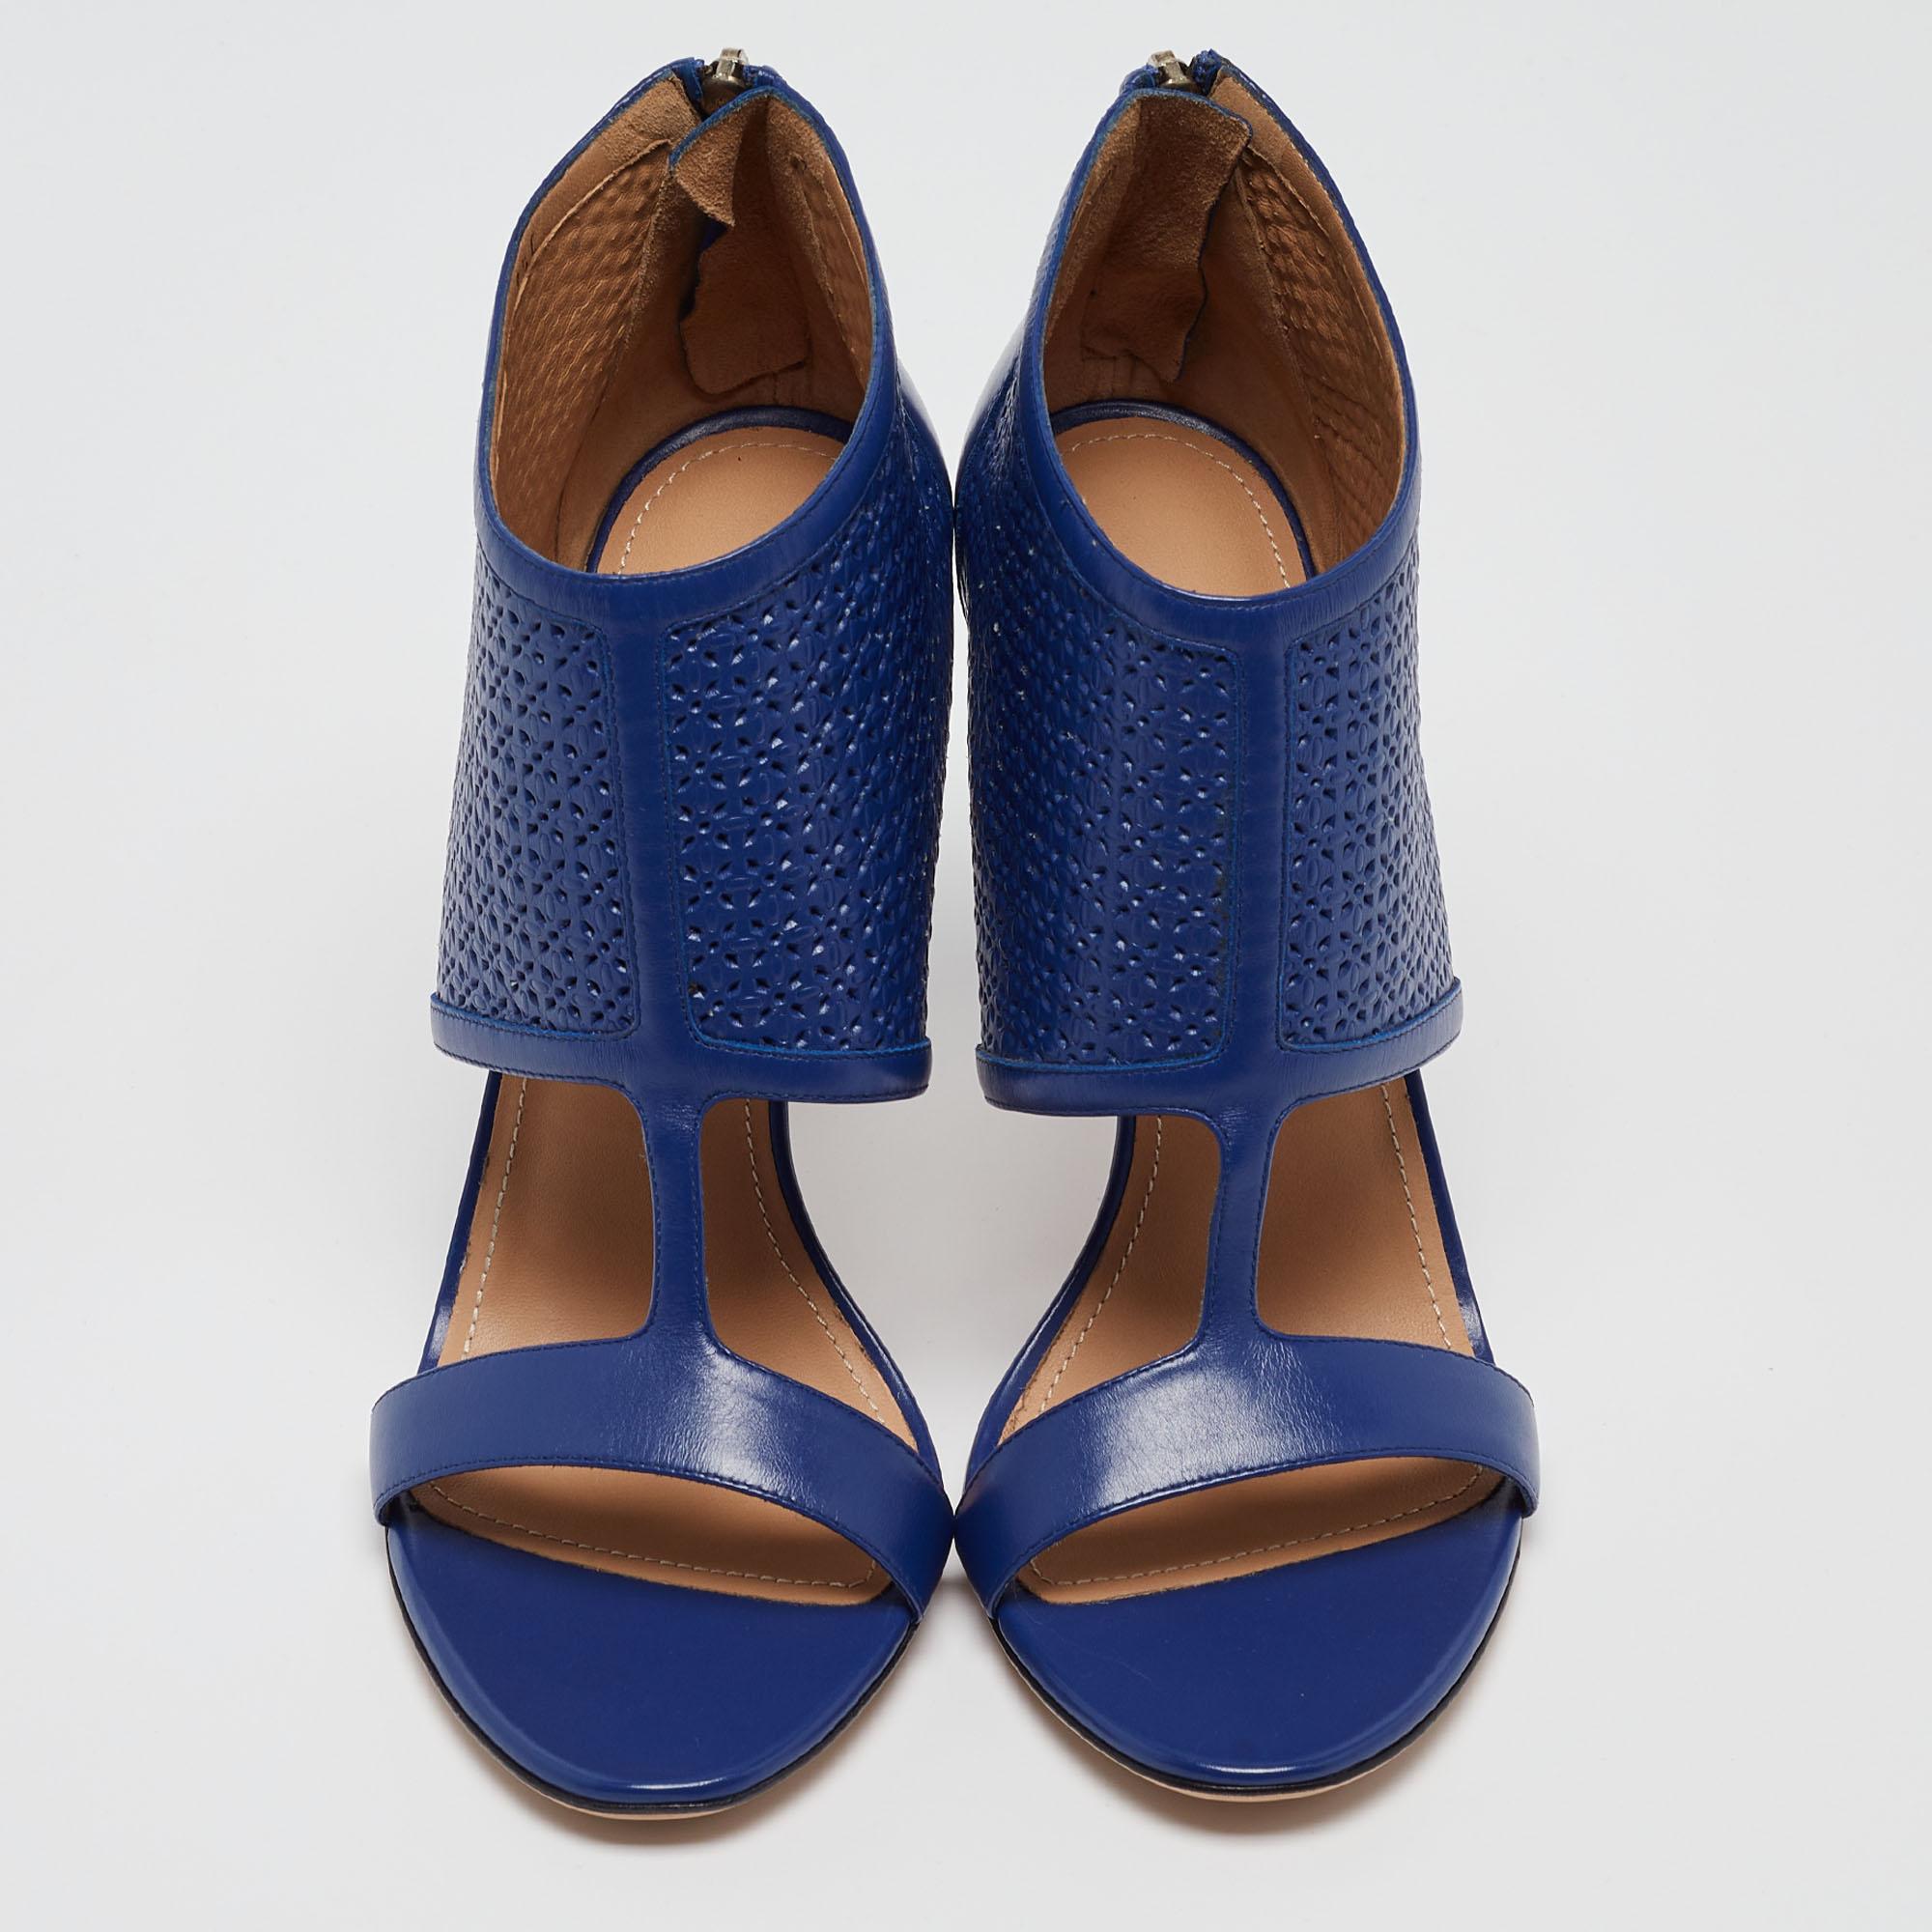 Salvatore Ferragamo blue perforated leather Pacella shoes exude feminine chic with edgy styling. These open toe ankle booties feature a silver tone zipper the back of the toe for a comfortable fit that grazes your ankles. The insoles of these shoes